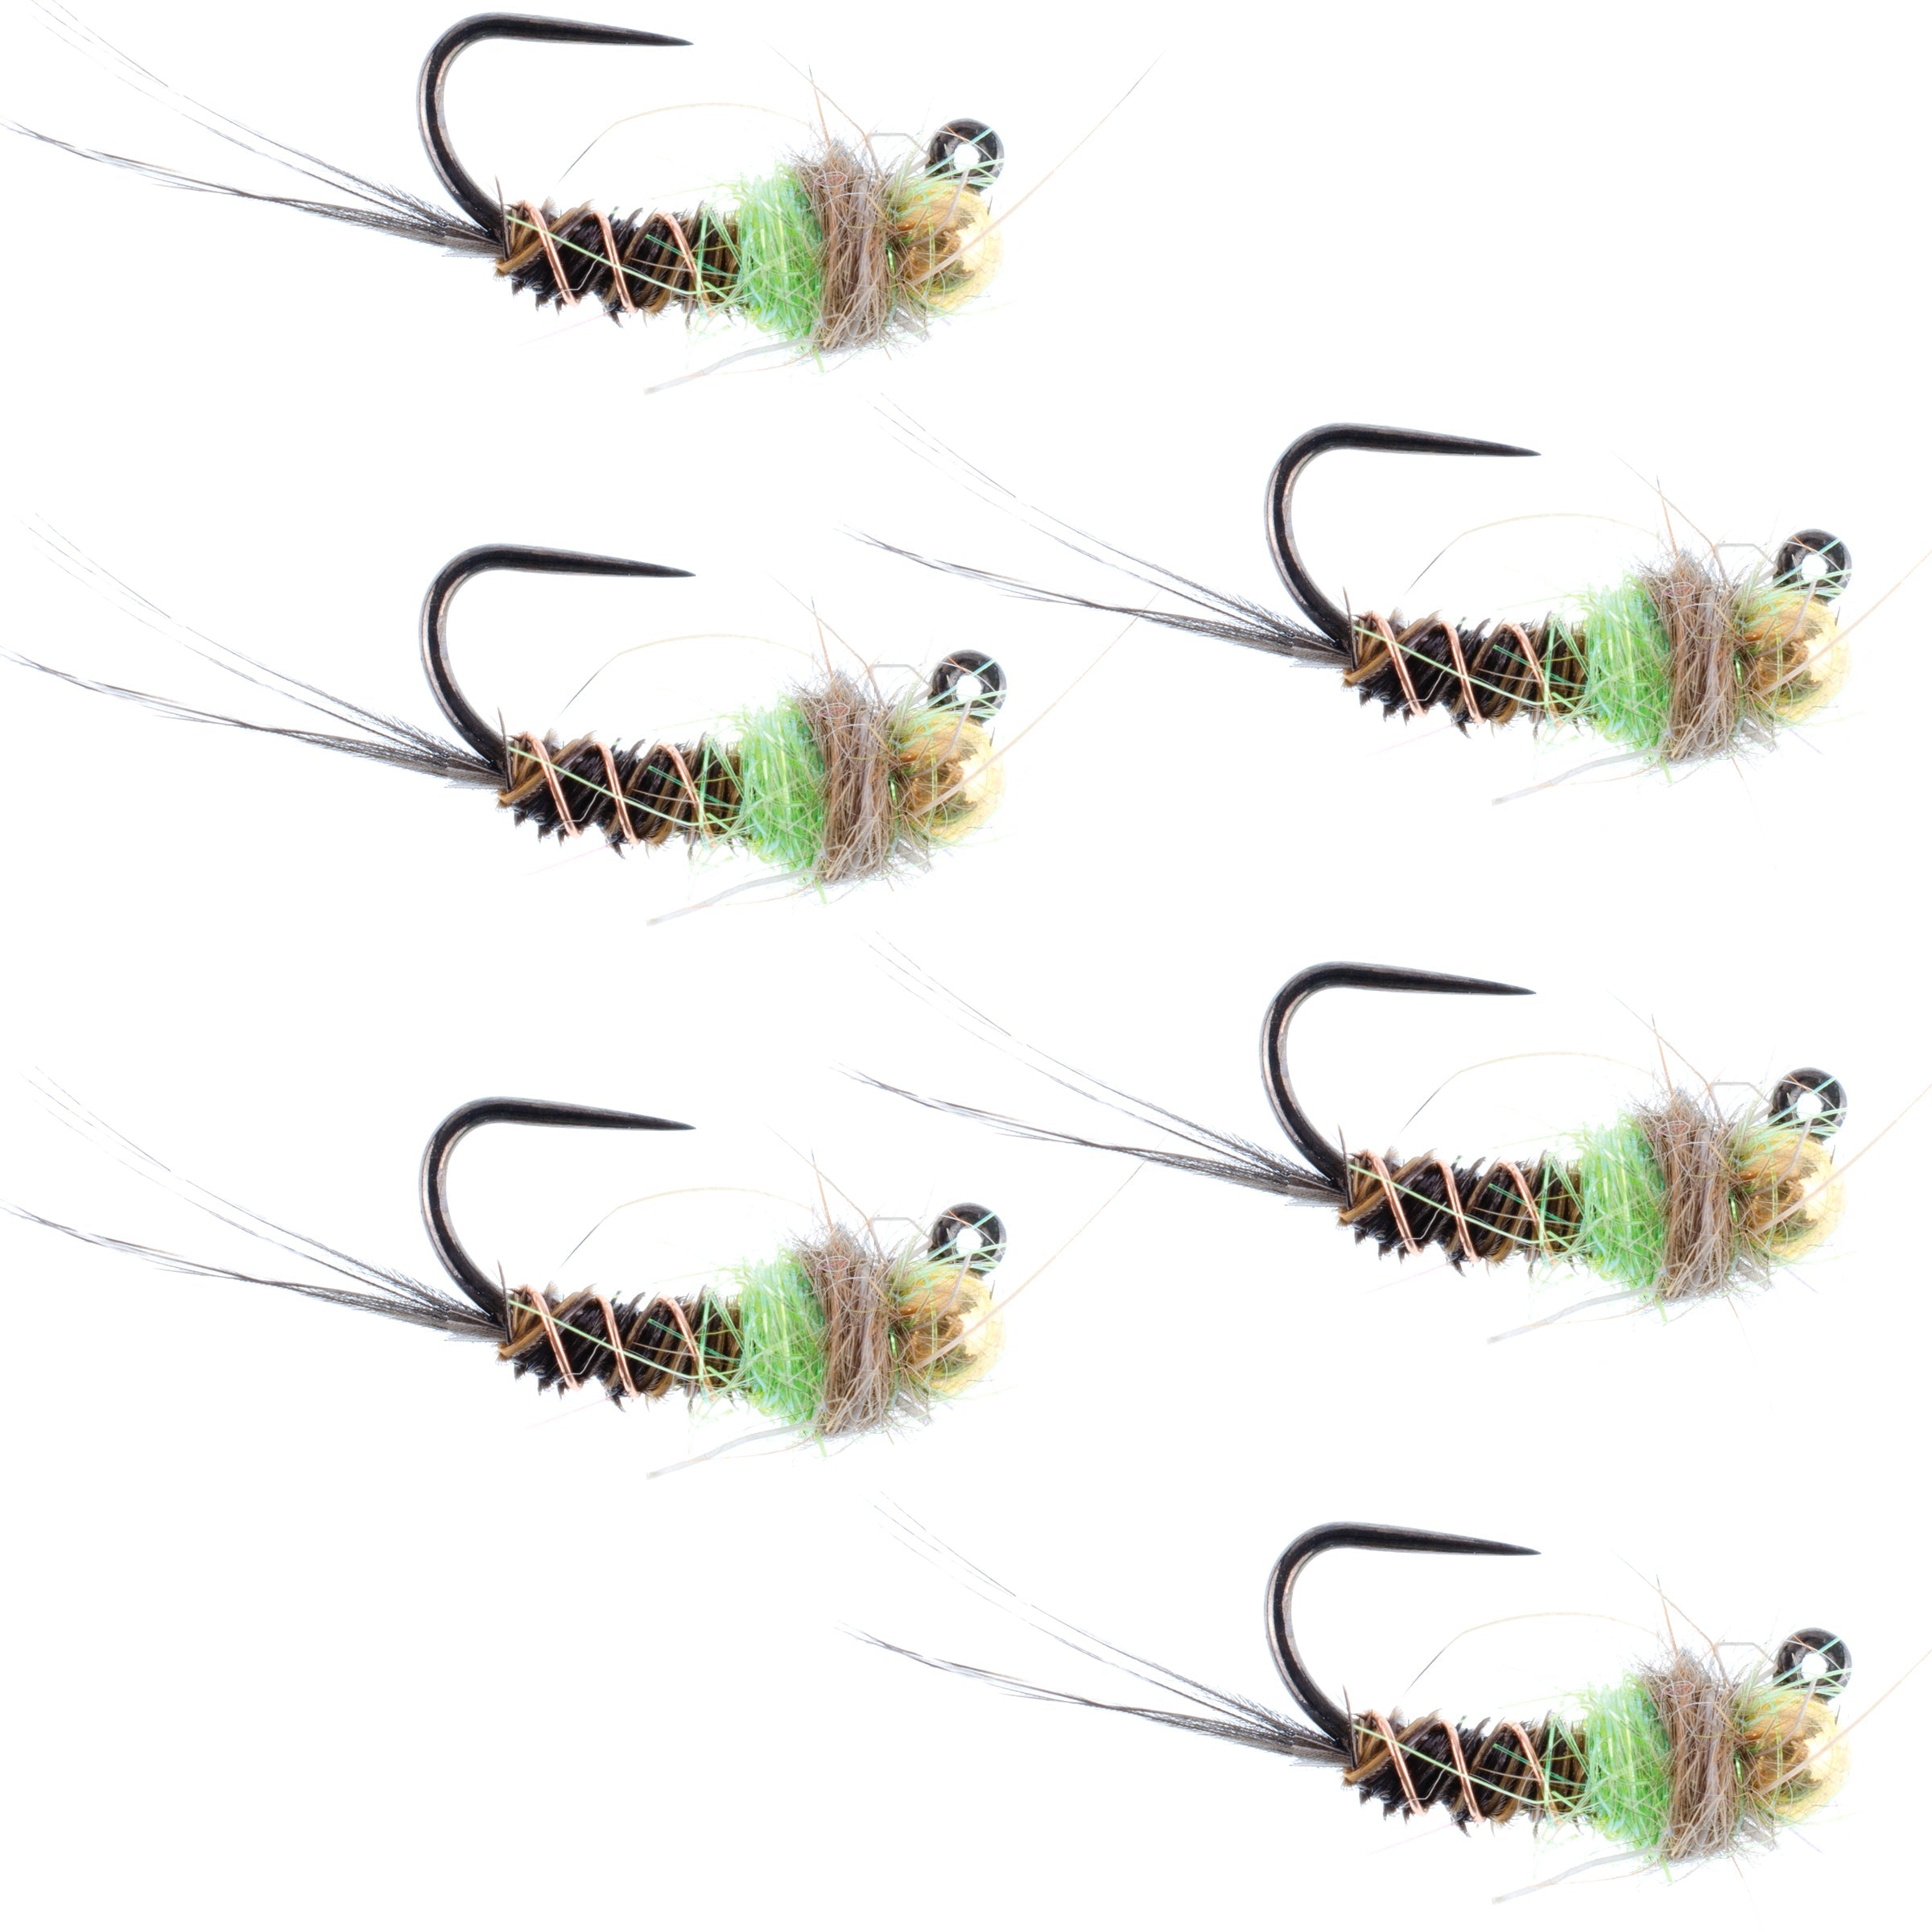 Tungsten Bead Hot Spot Pheasant Tail Tactical Jig Chartreuse Czech Nymph Euro Nymphing Fly - 6 Flies Size 14